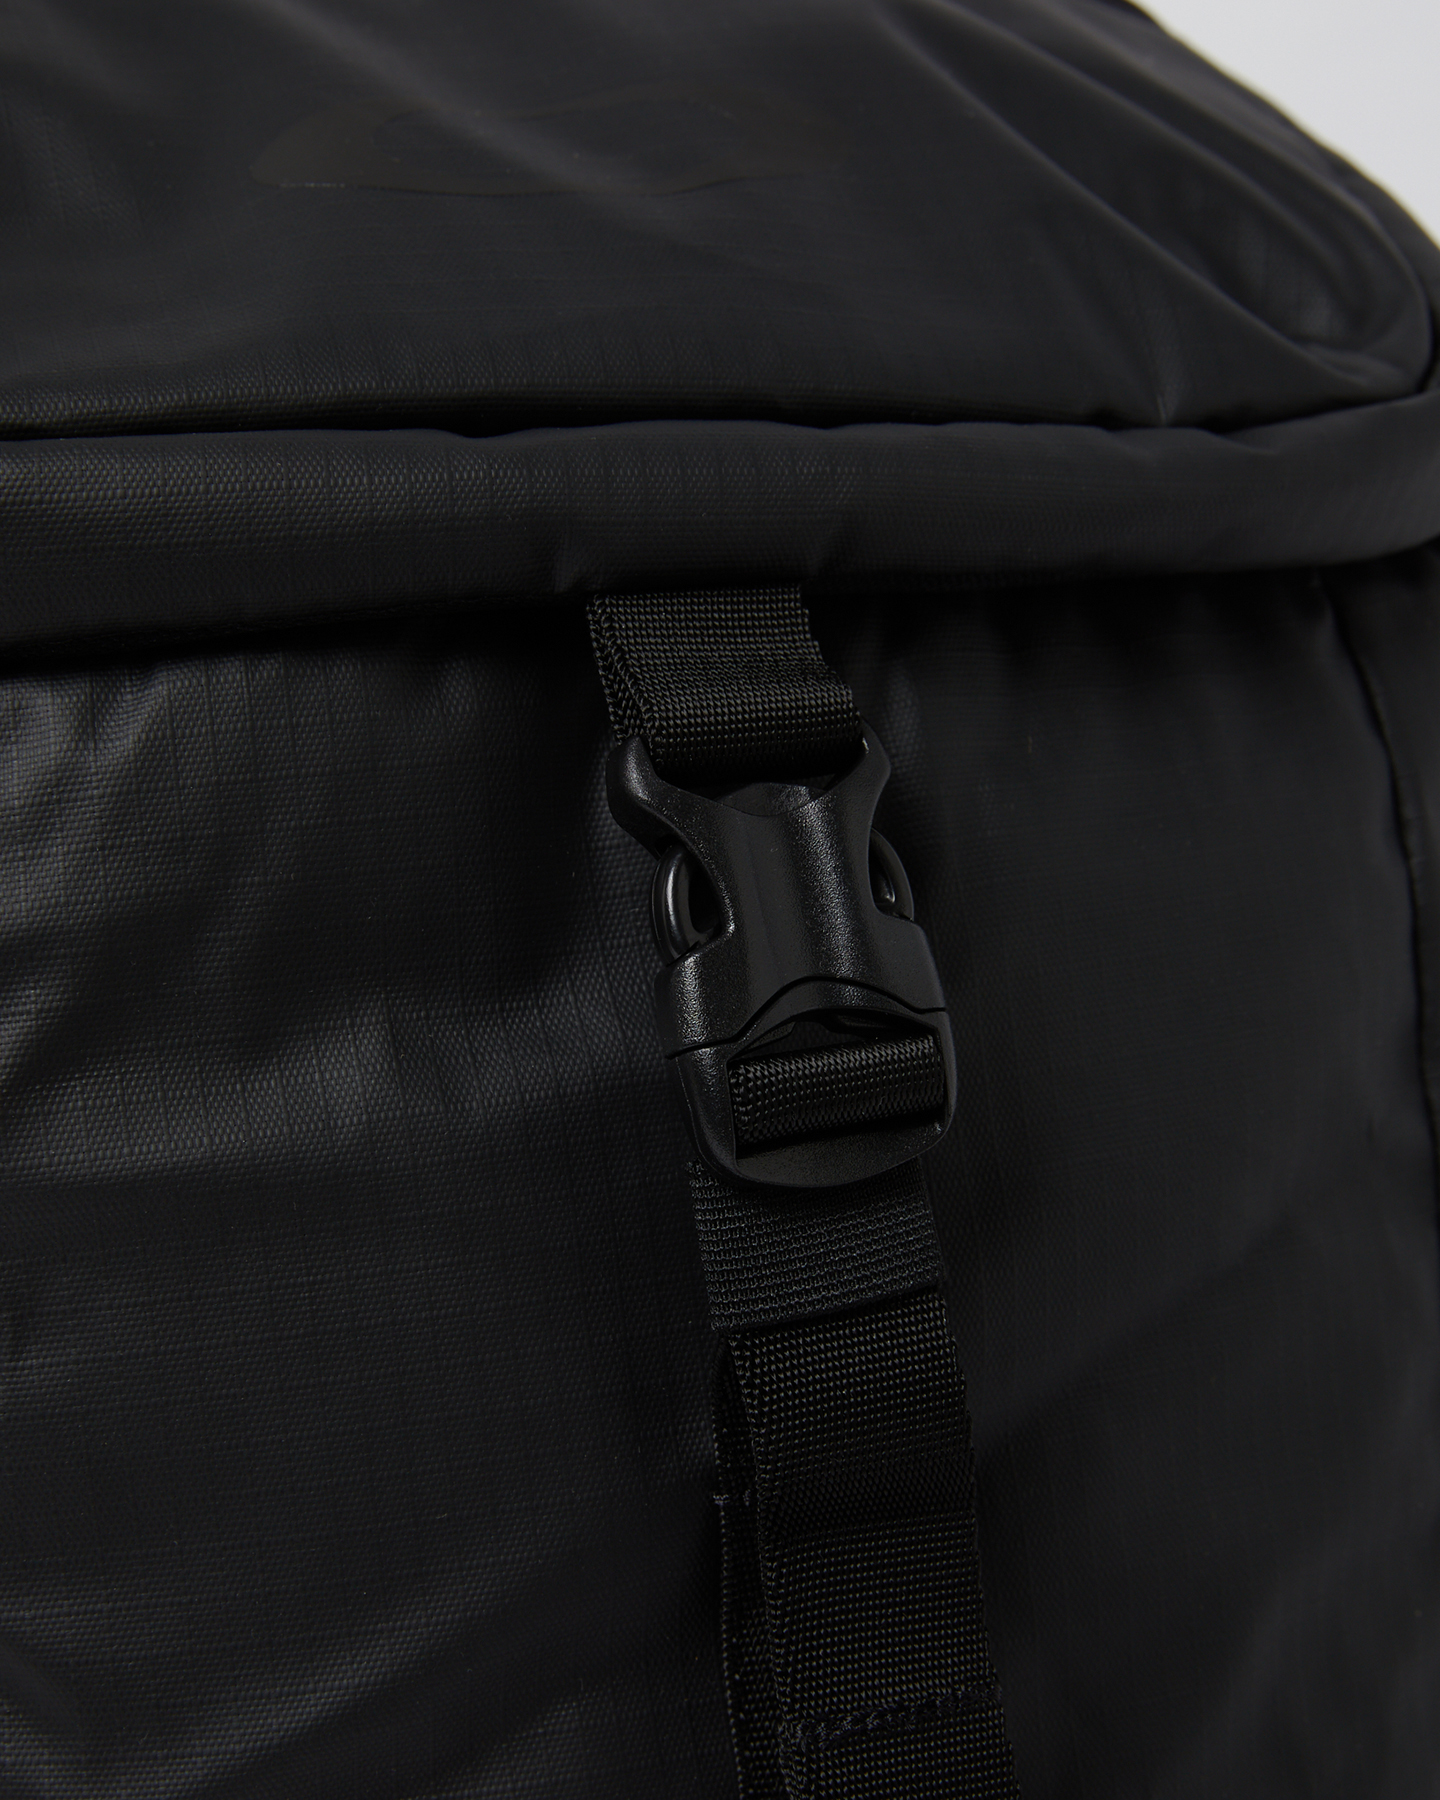 Oakley Road Trip Rc Backpack - Blackout | SurfStitch